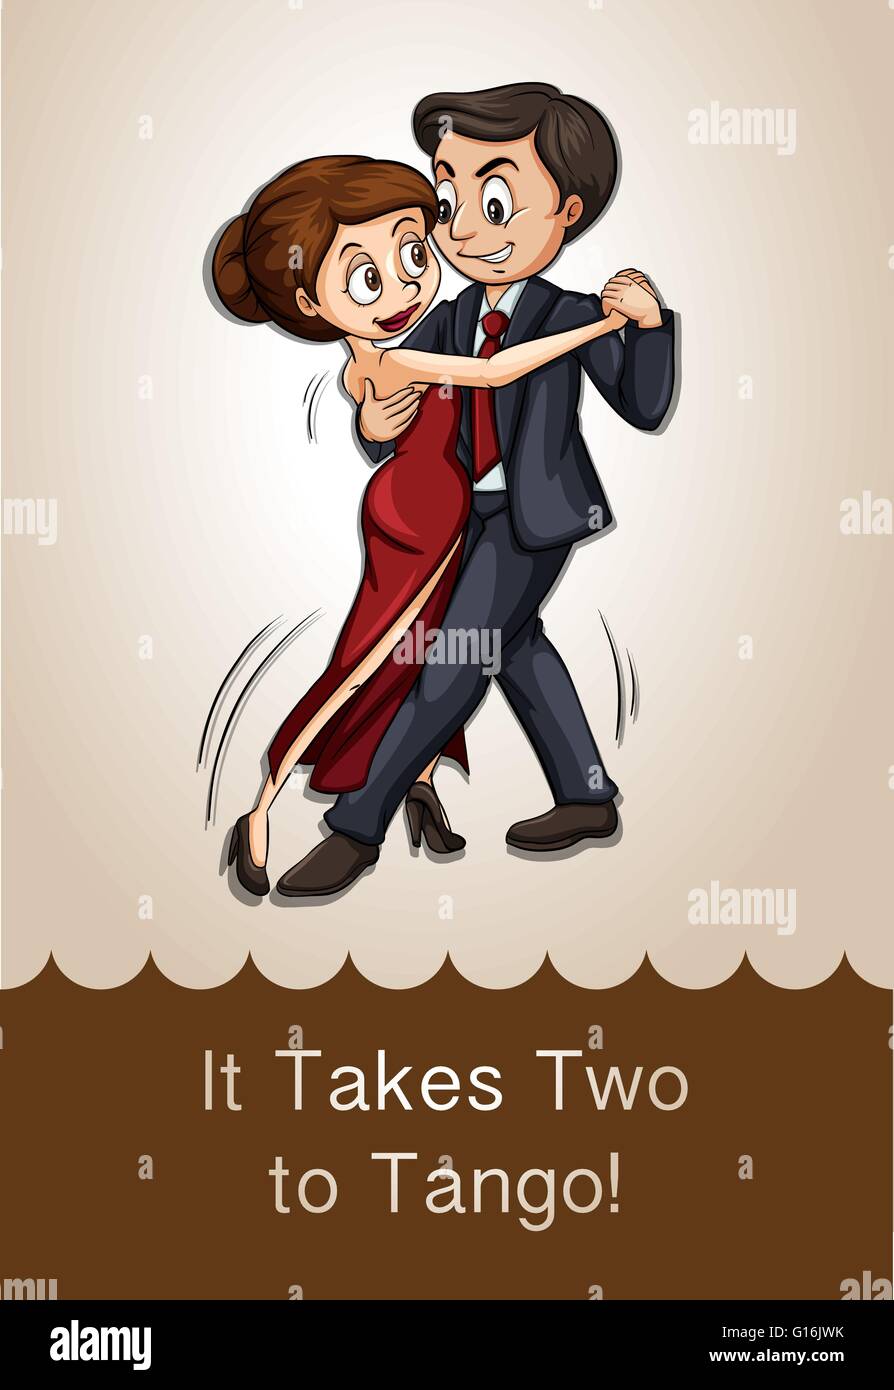 Man and woman dancing together illustration Stock Vector